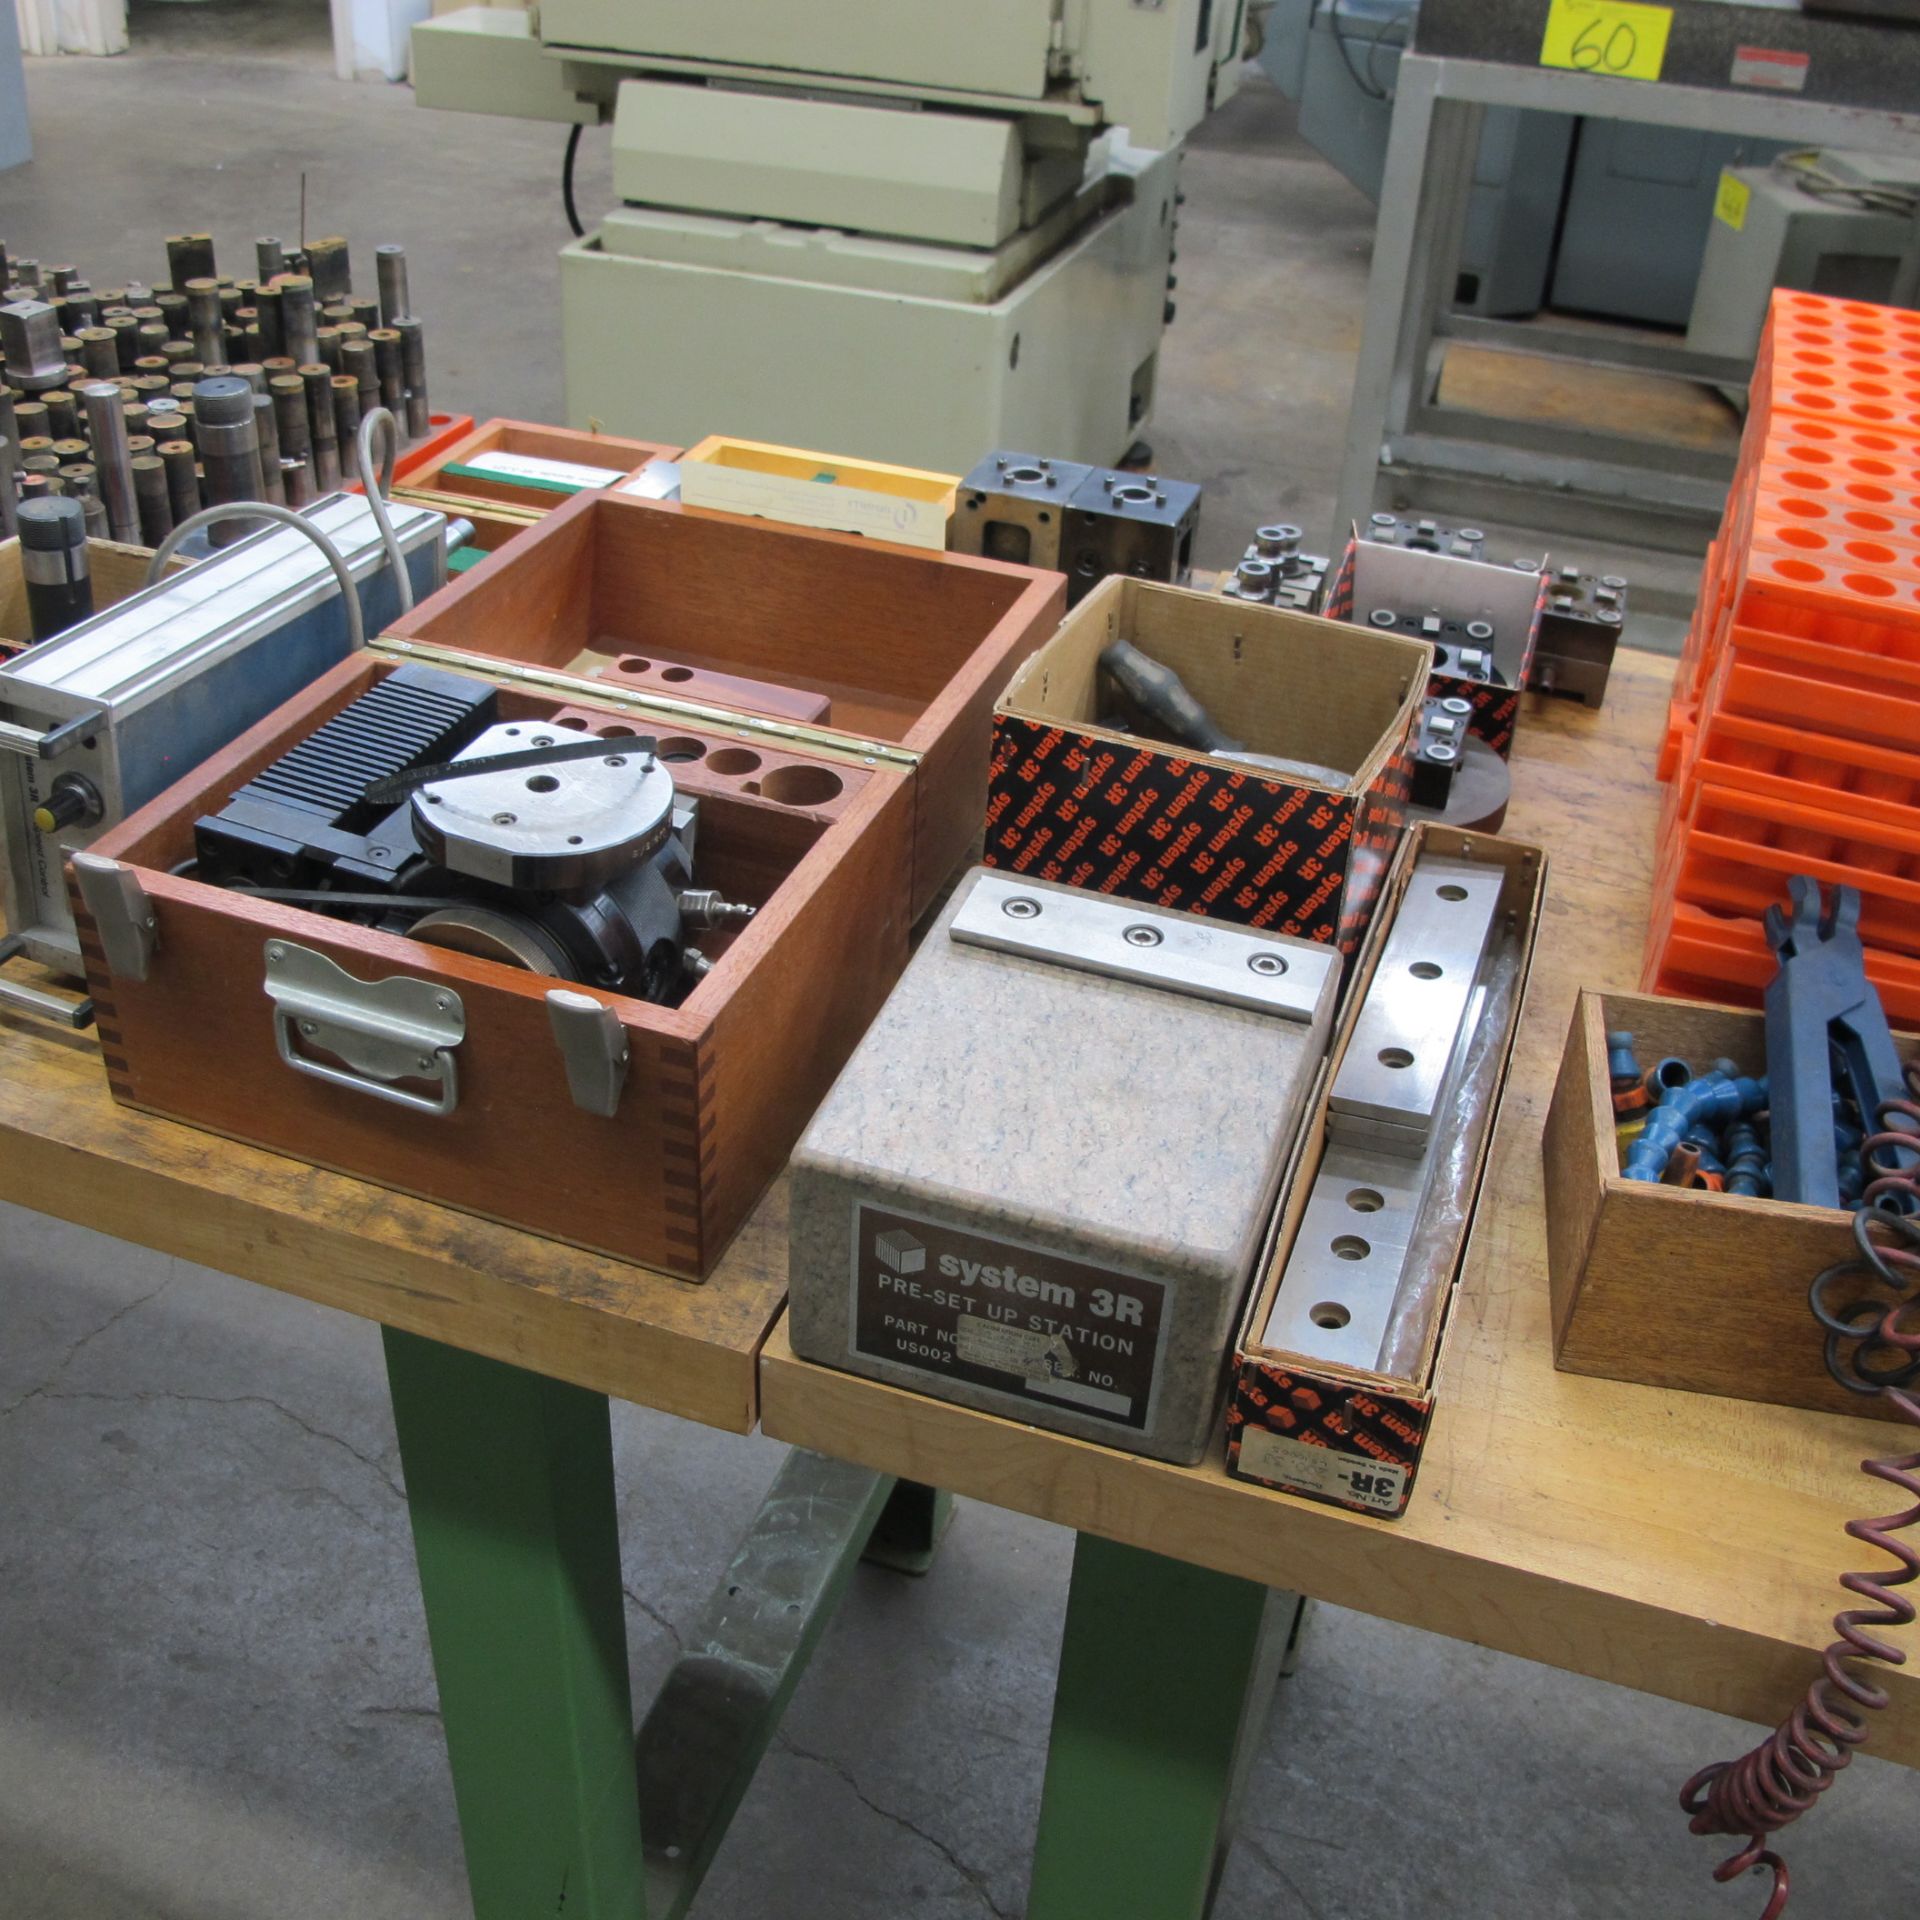 LOT OF SYSTEM R3 EDM BLOCKS, TRAYS, SPINDLES, SPEED CONTROLLER AND ELECTRODES - Image 6 of 6